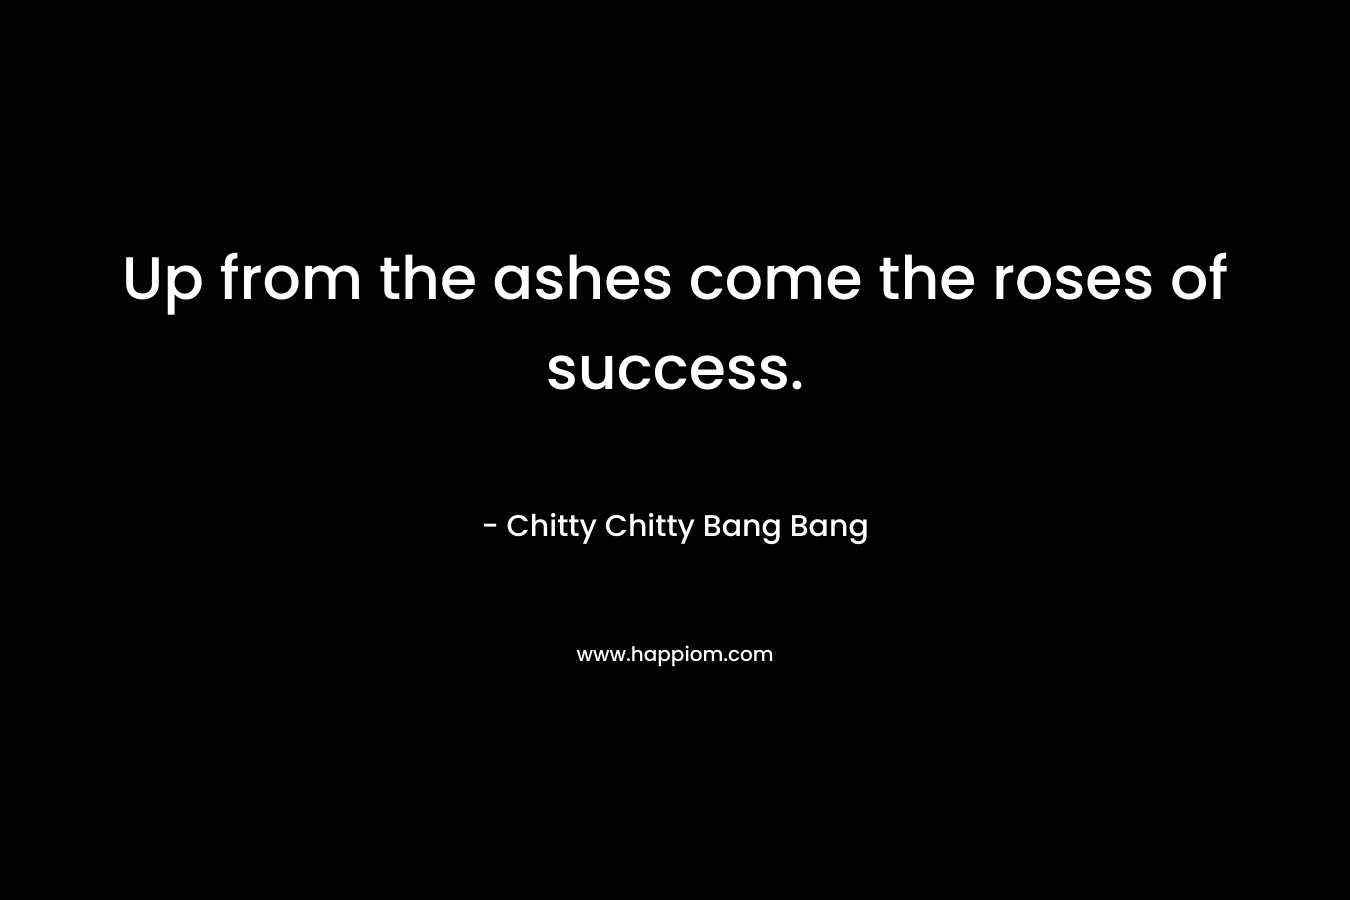 Up from the ashes come the roses of success. – Chitty Chitty Bang Bang